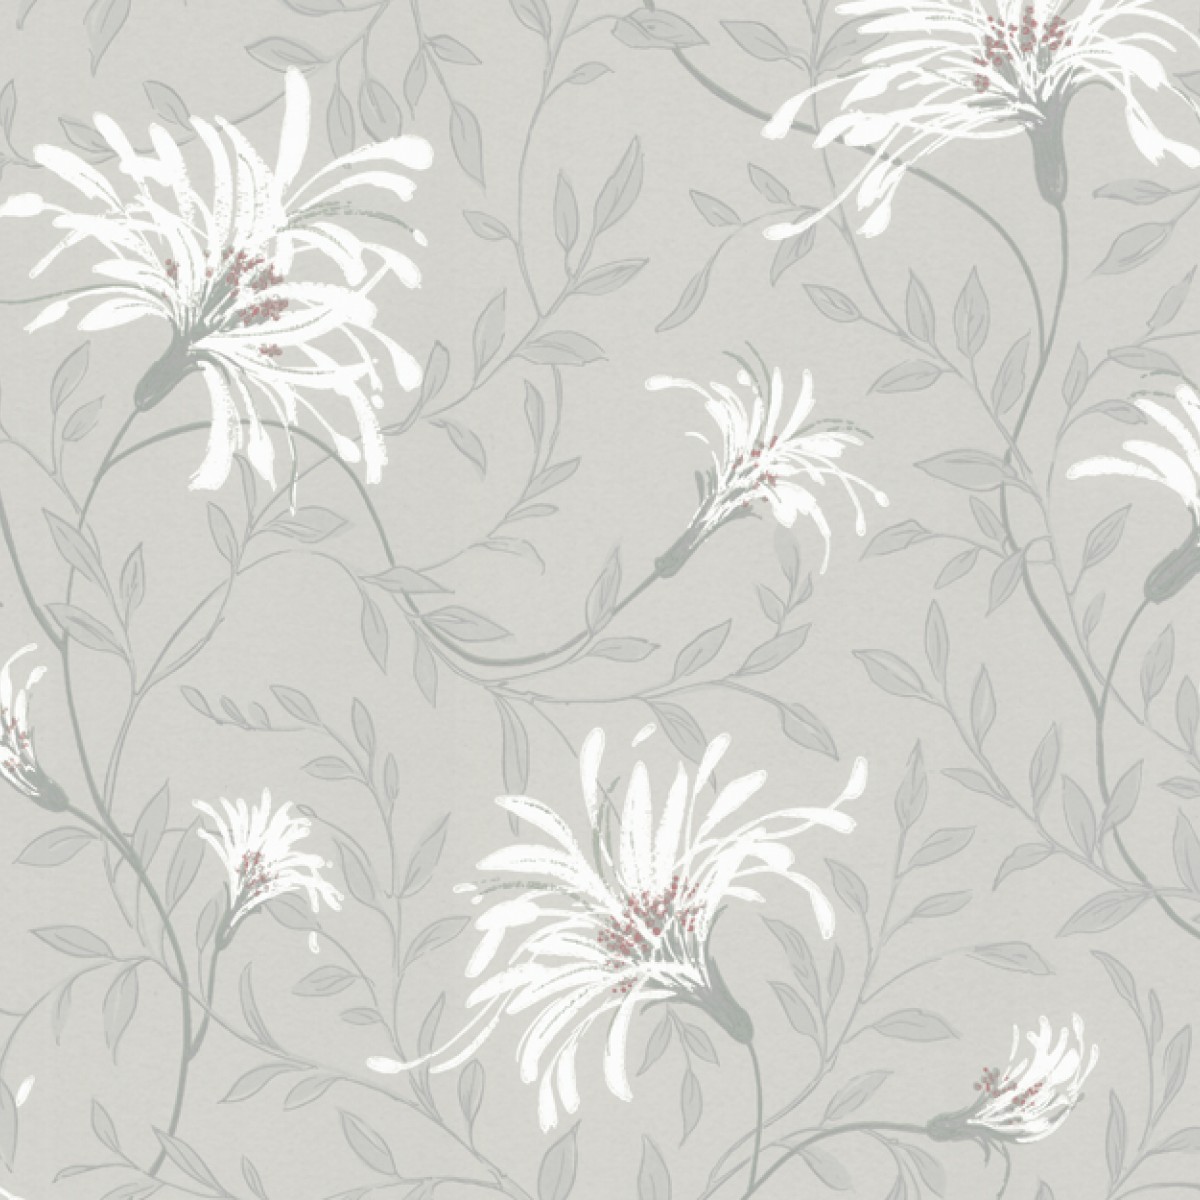 Tapet Fairhaven, Grey Luxury Floral, 1838 Wallcoverings, 5.3mp / rola, Tapet living 